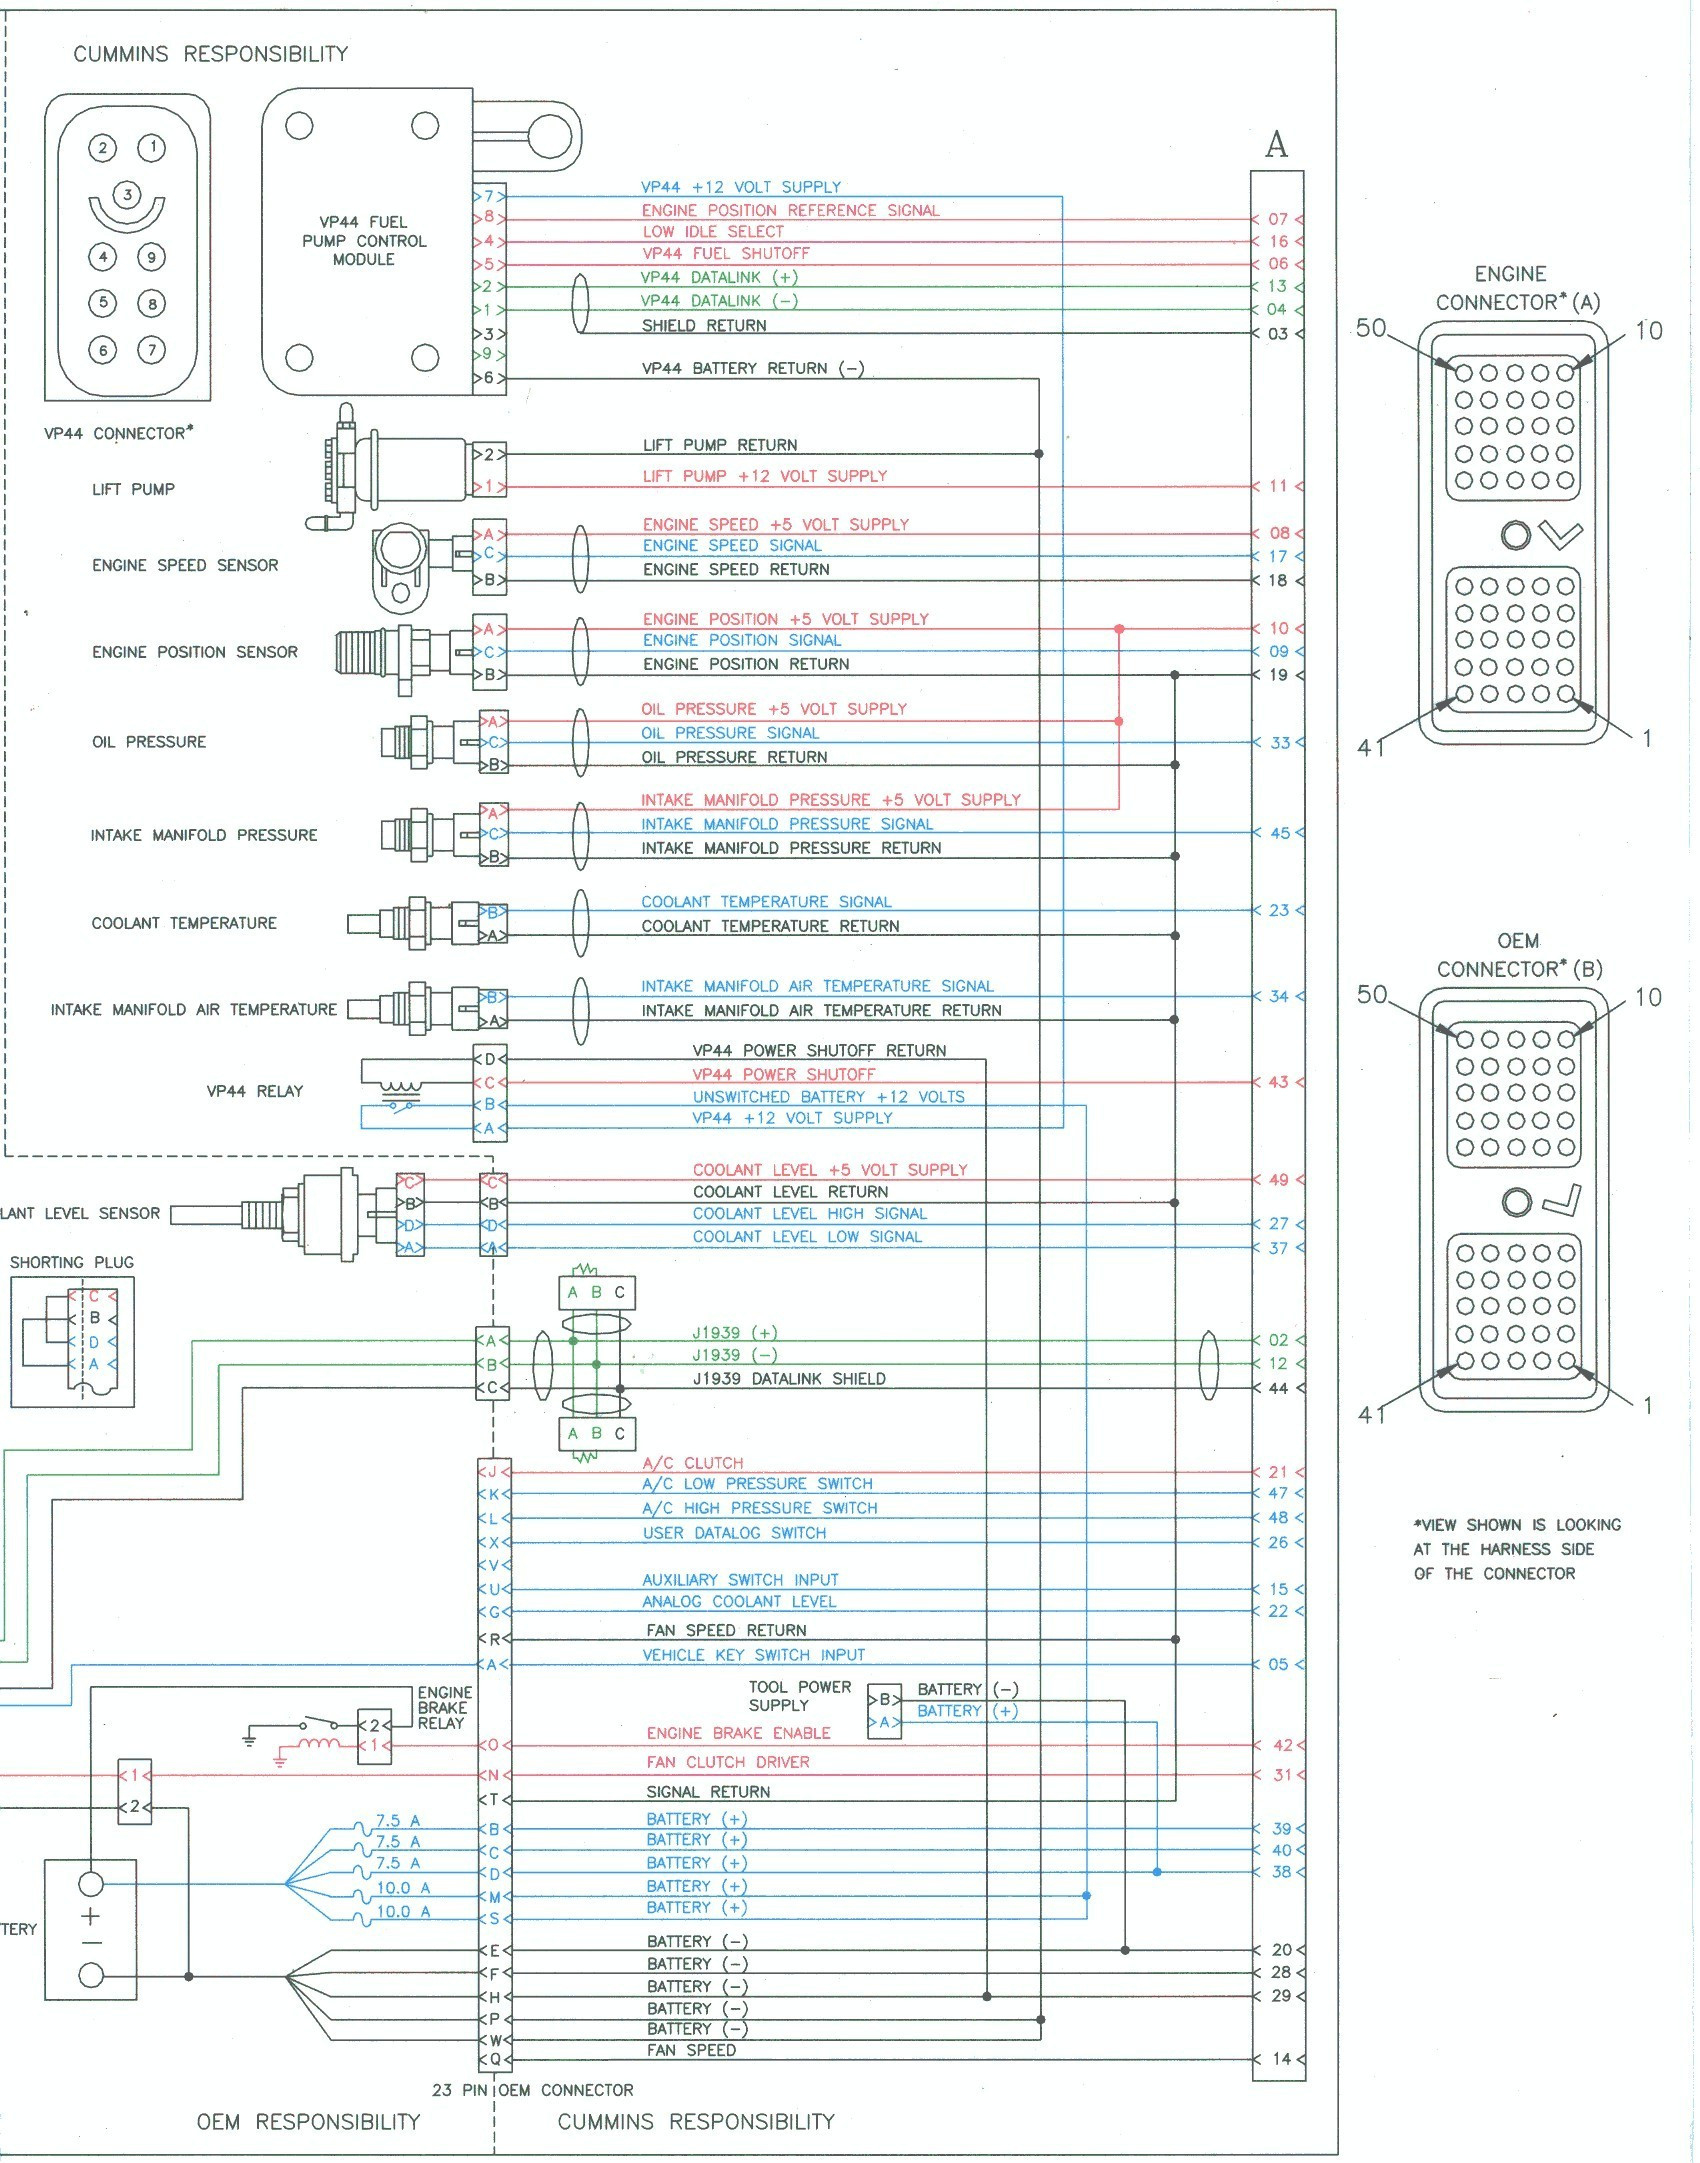 2001 Dodge Stratus Wiring Diagram Simplified Shapes Wiring Diagram - 1999 Dodge Ram 1500 Radio Wiring Diagram